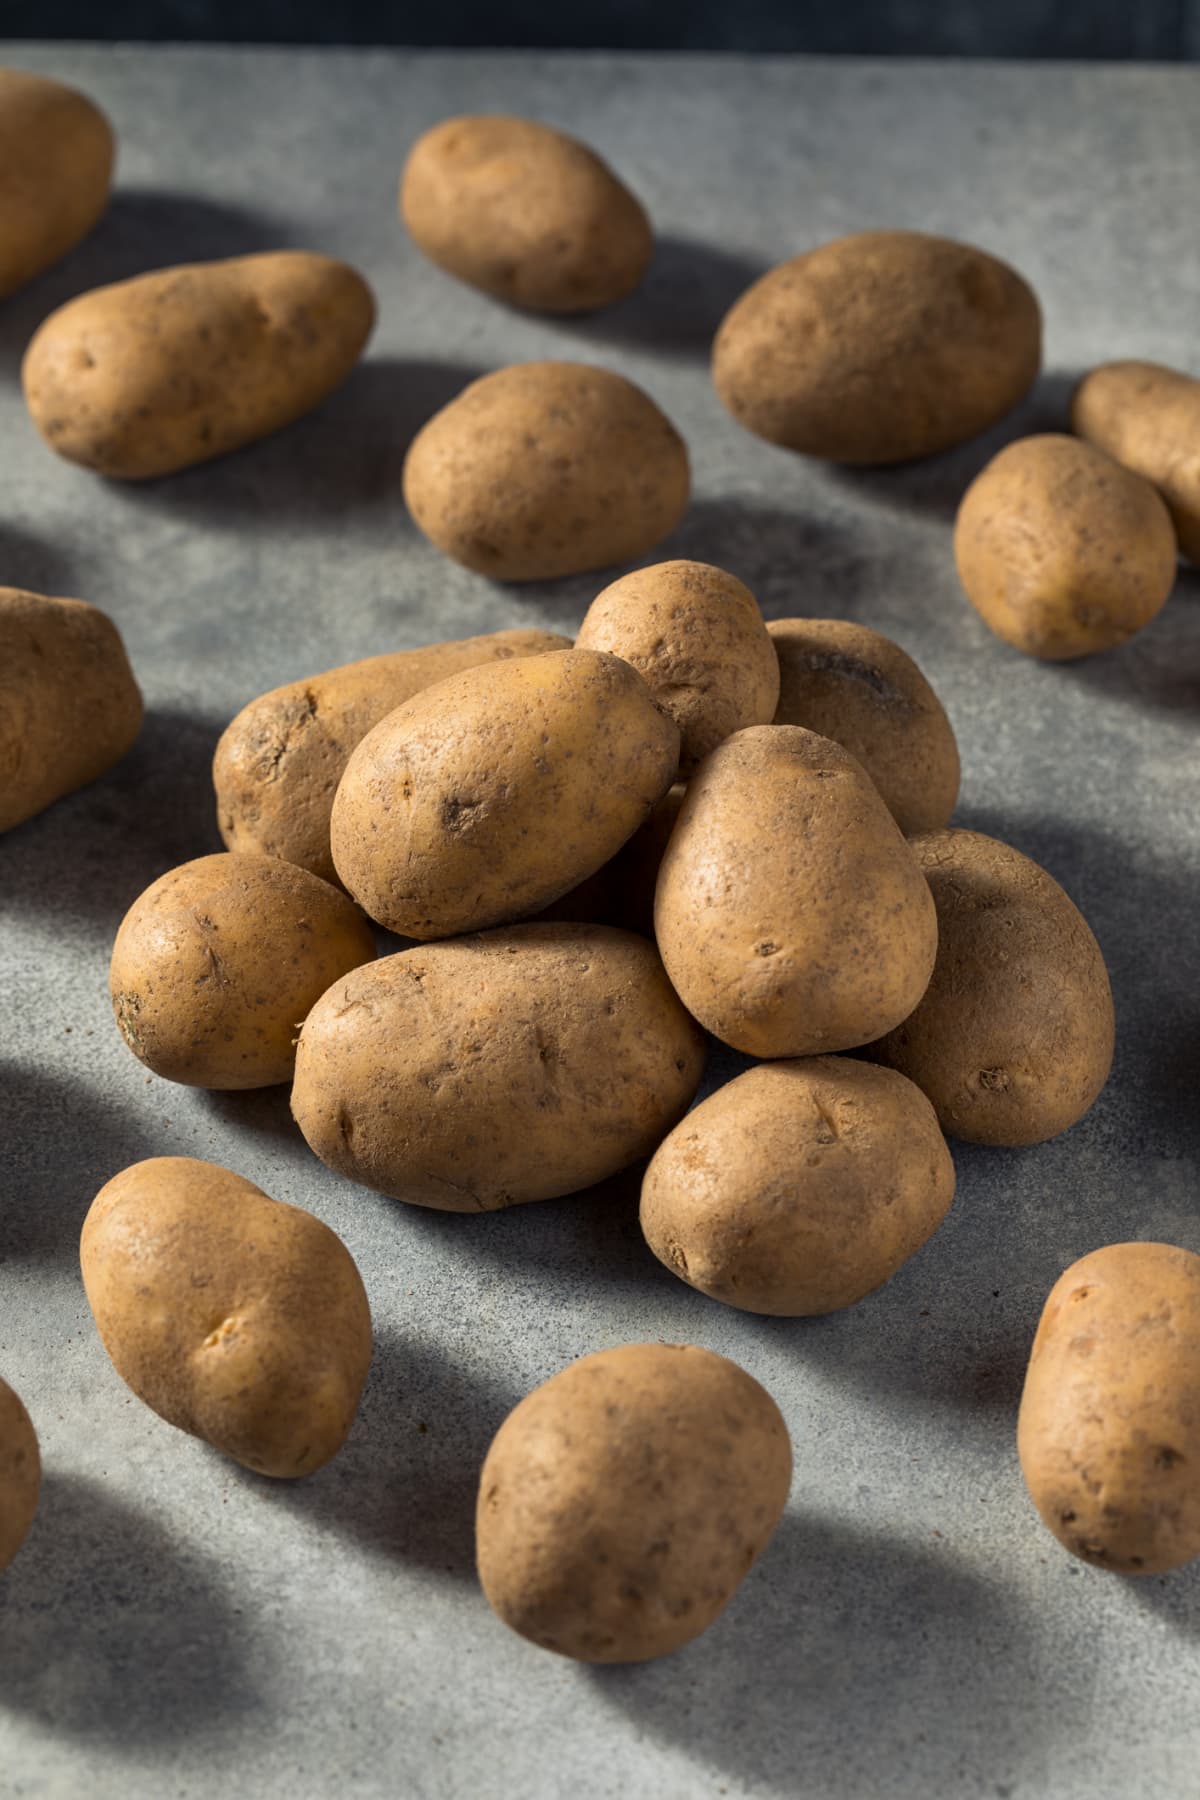 Pile of russet potatoes